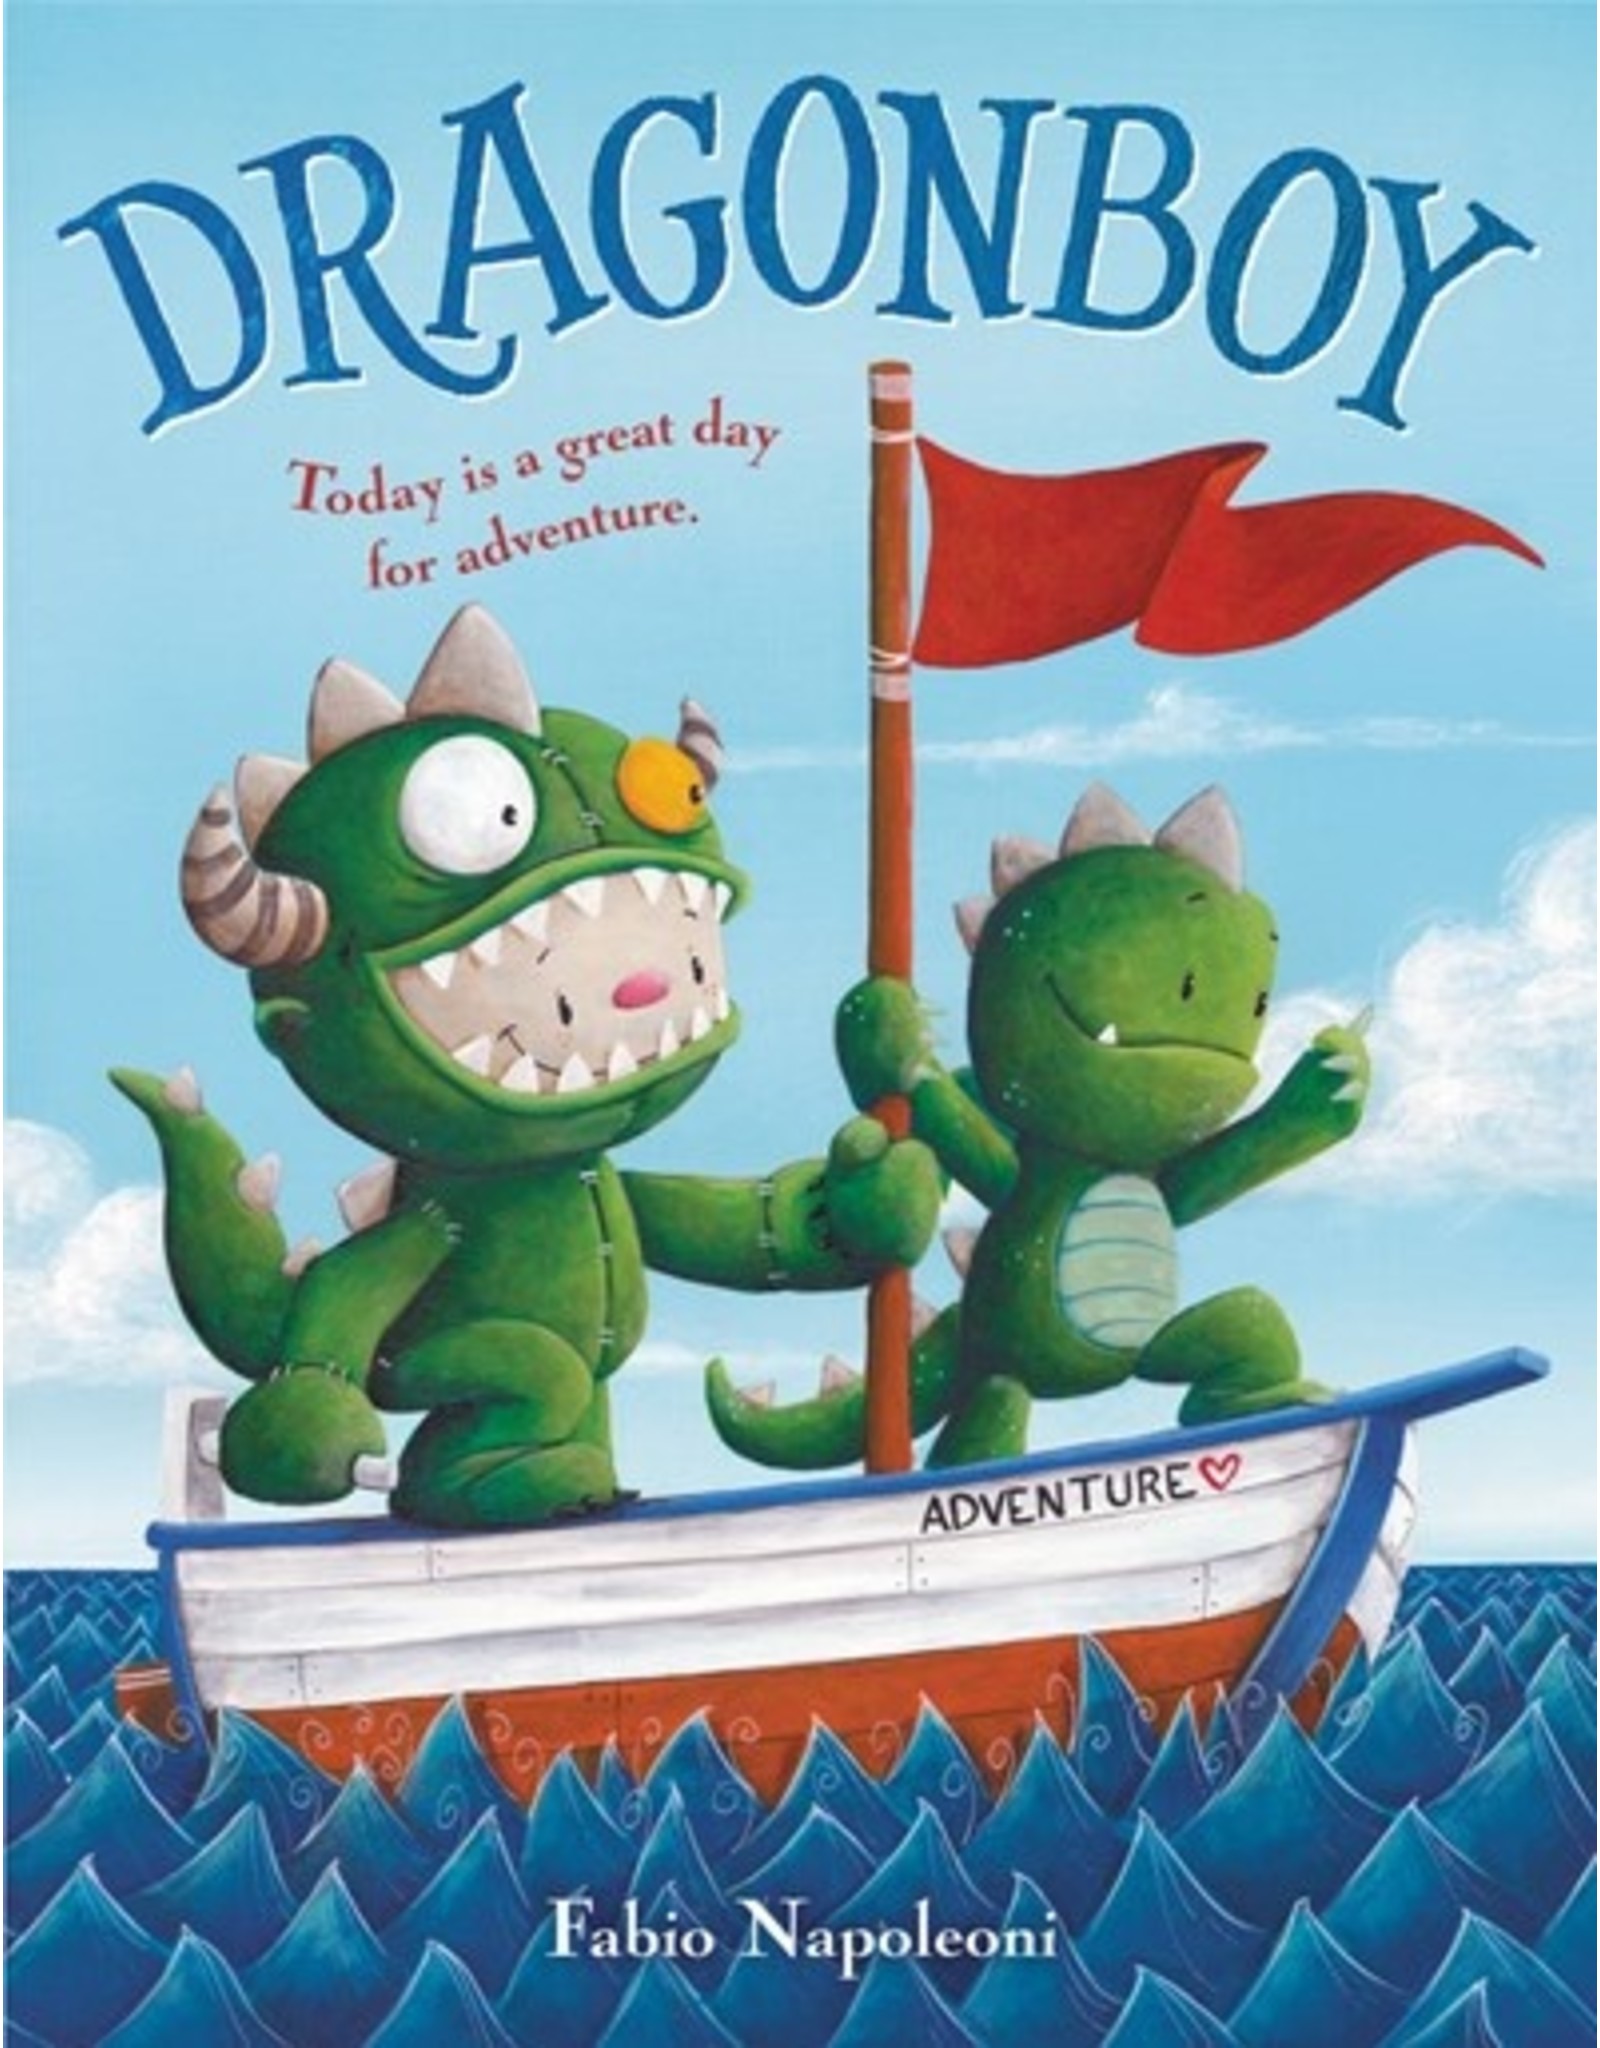 Books Dragonboy: Today is a great day for adventure by Fabio Napoleoni (Holiday Catalog 21)